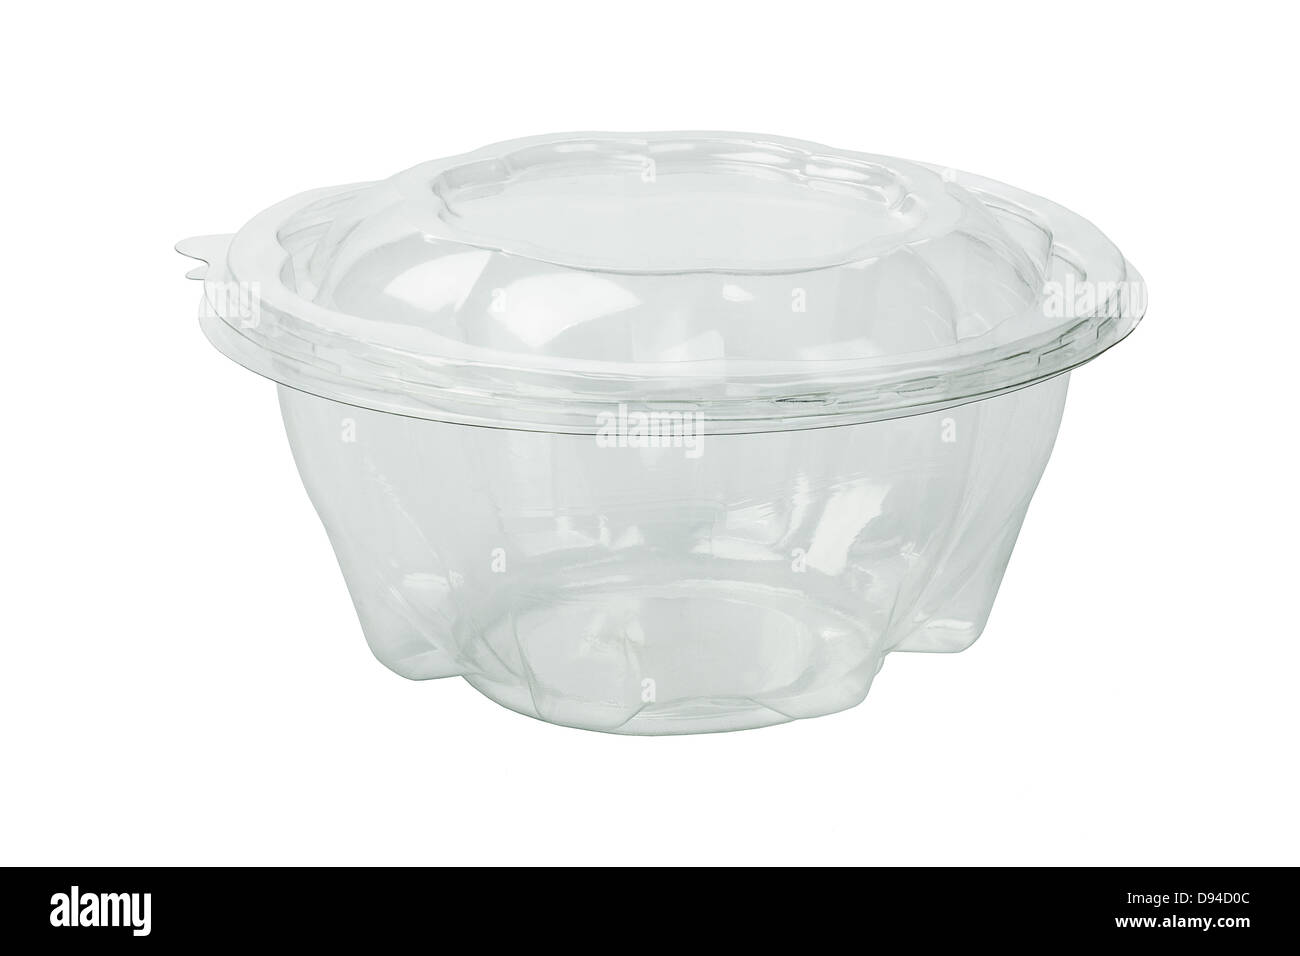 Empty Plastic Food Container on White Background Stock Photo